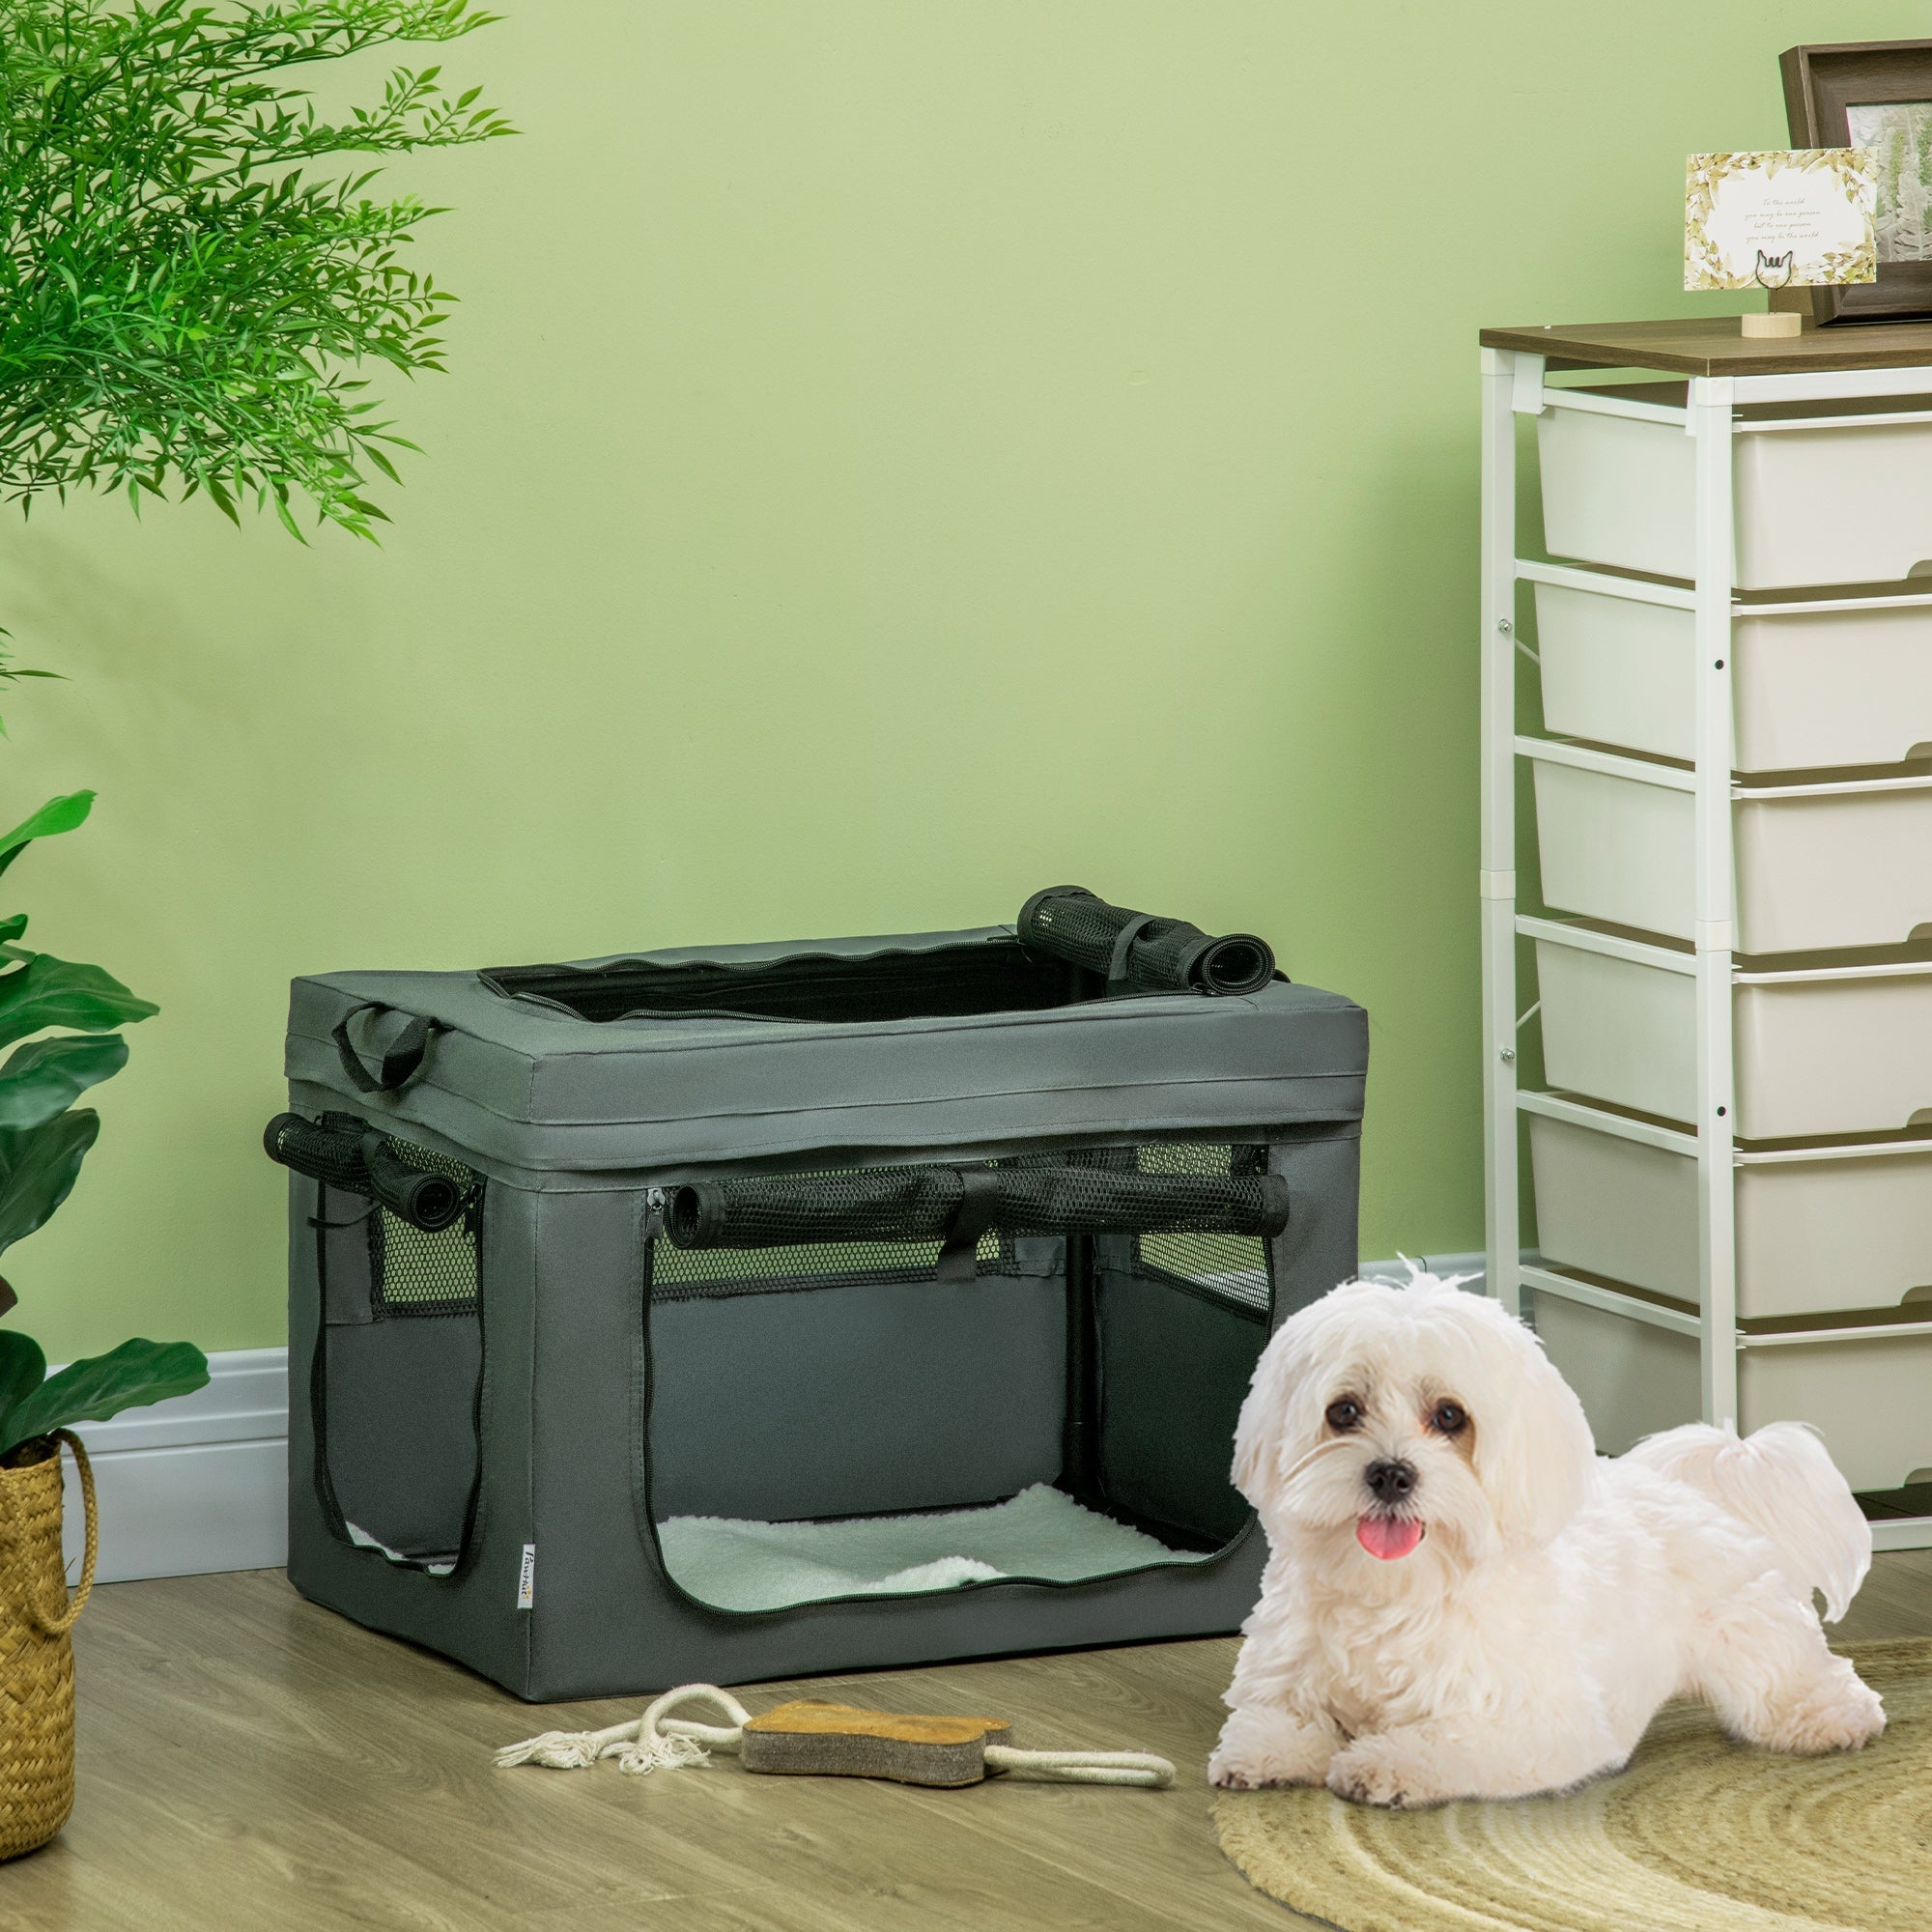 60cm Portable Pet Carrier with Soft Cushion & Mesh Window, for Miniature Dogs, PawHut, Grey